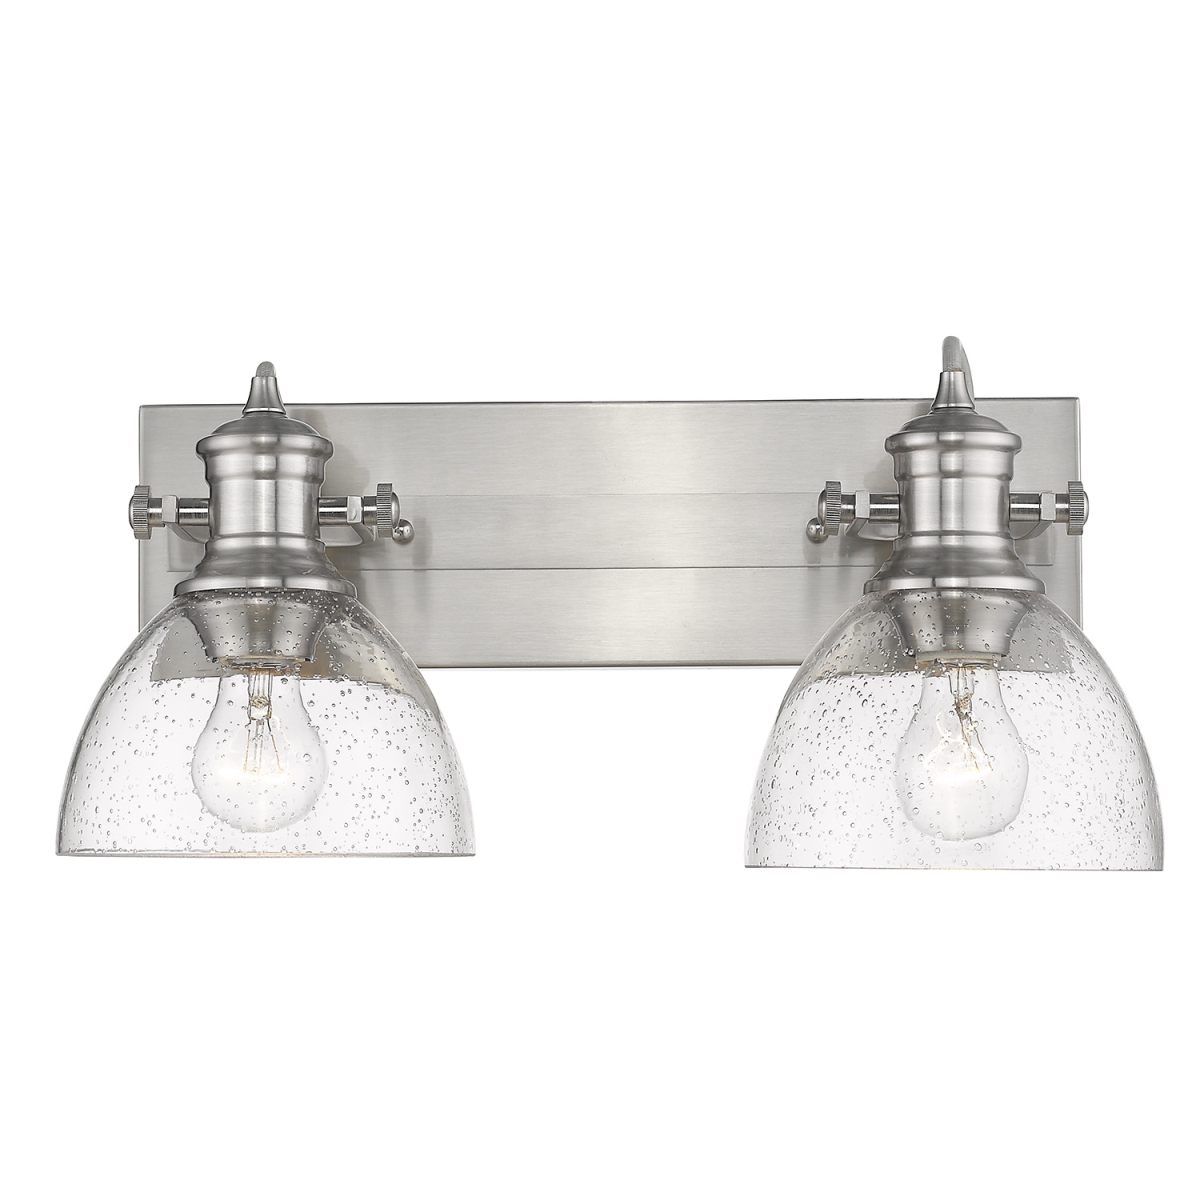 Picture of Golden Lighting 3118-BA2 PW-SD 18 in. Hines 2 Lights Pewter Bath Fixture Wall Light with Seeded Glass, Silver